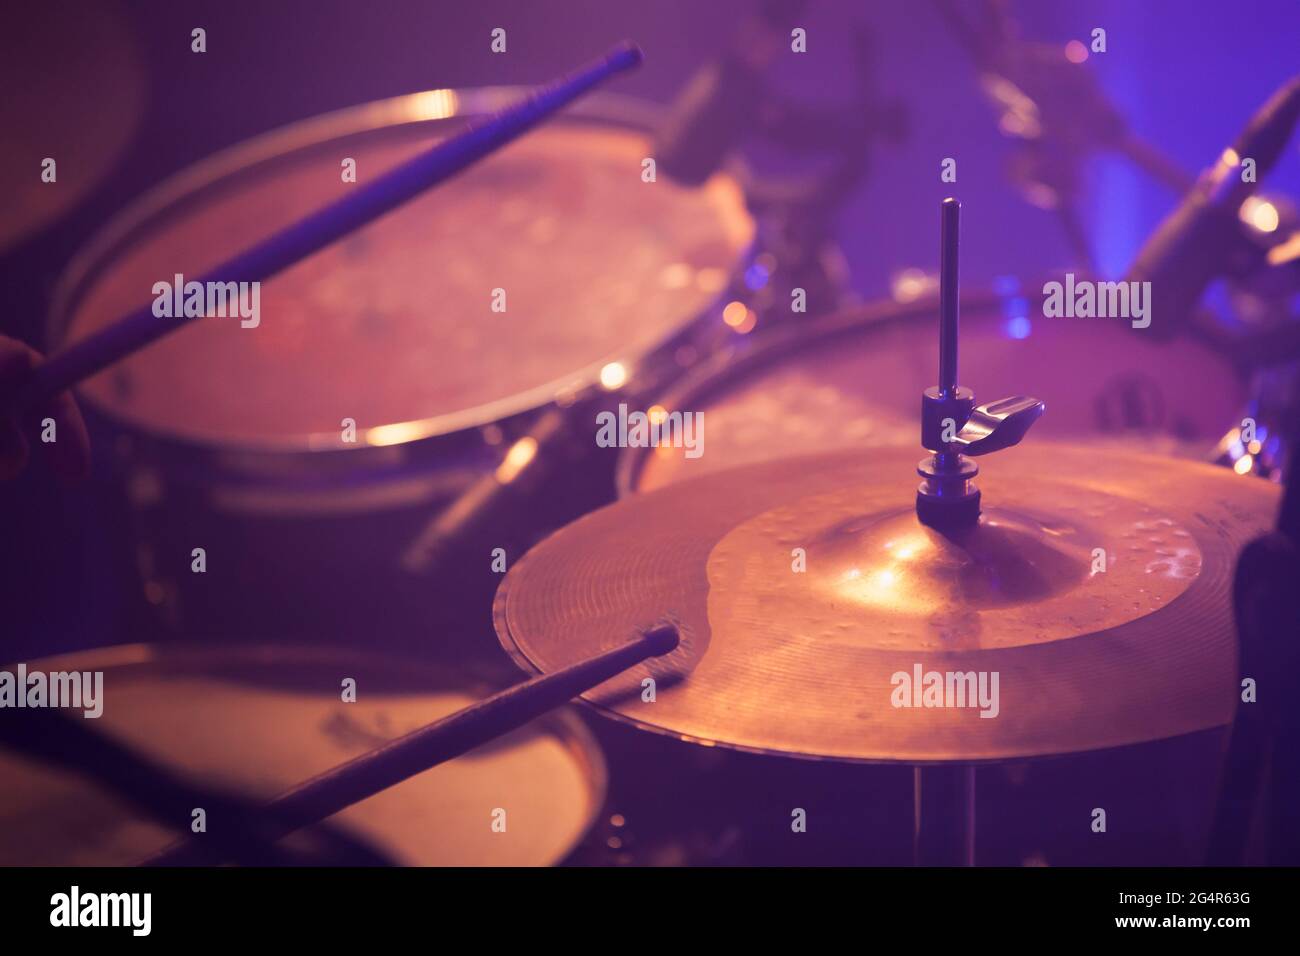 Drum set in stage lights. Close-up photo, soft selective focus. Live music background Stock Photo